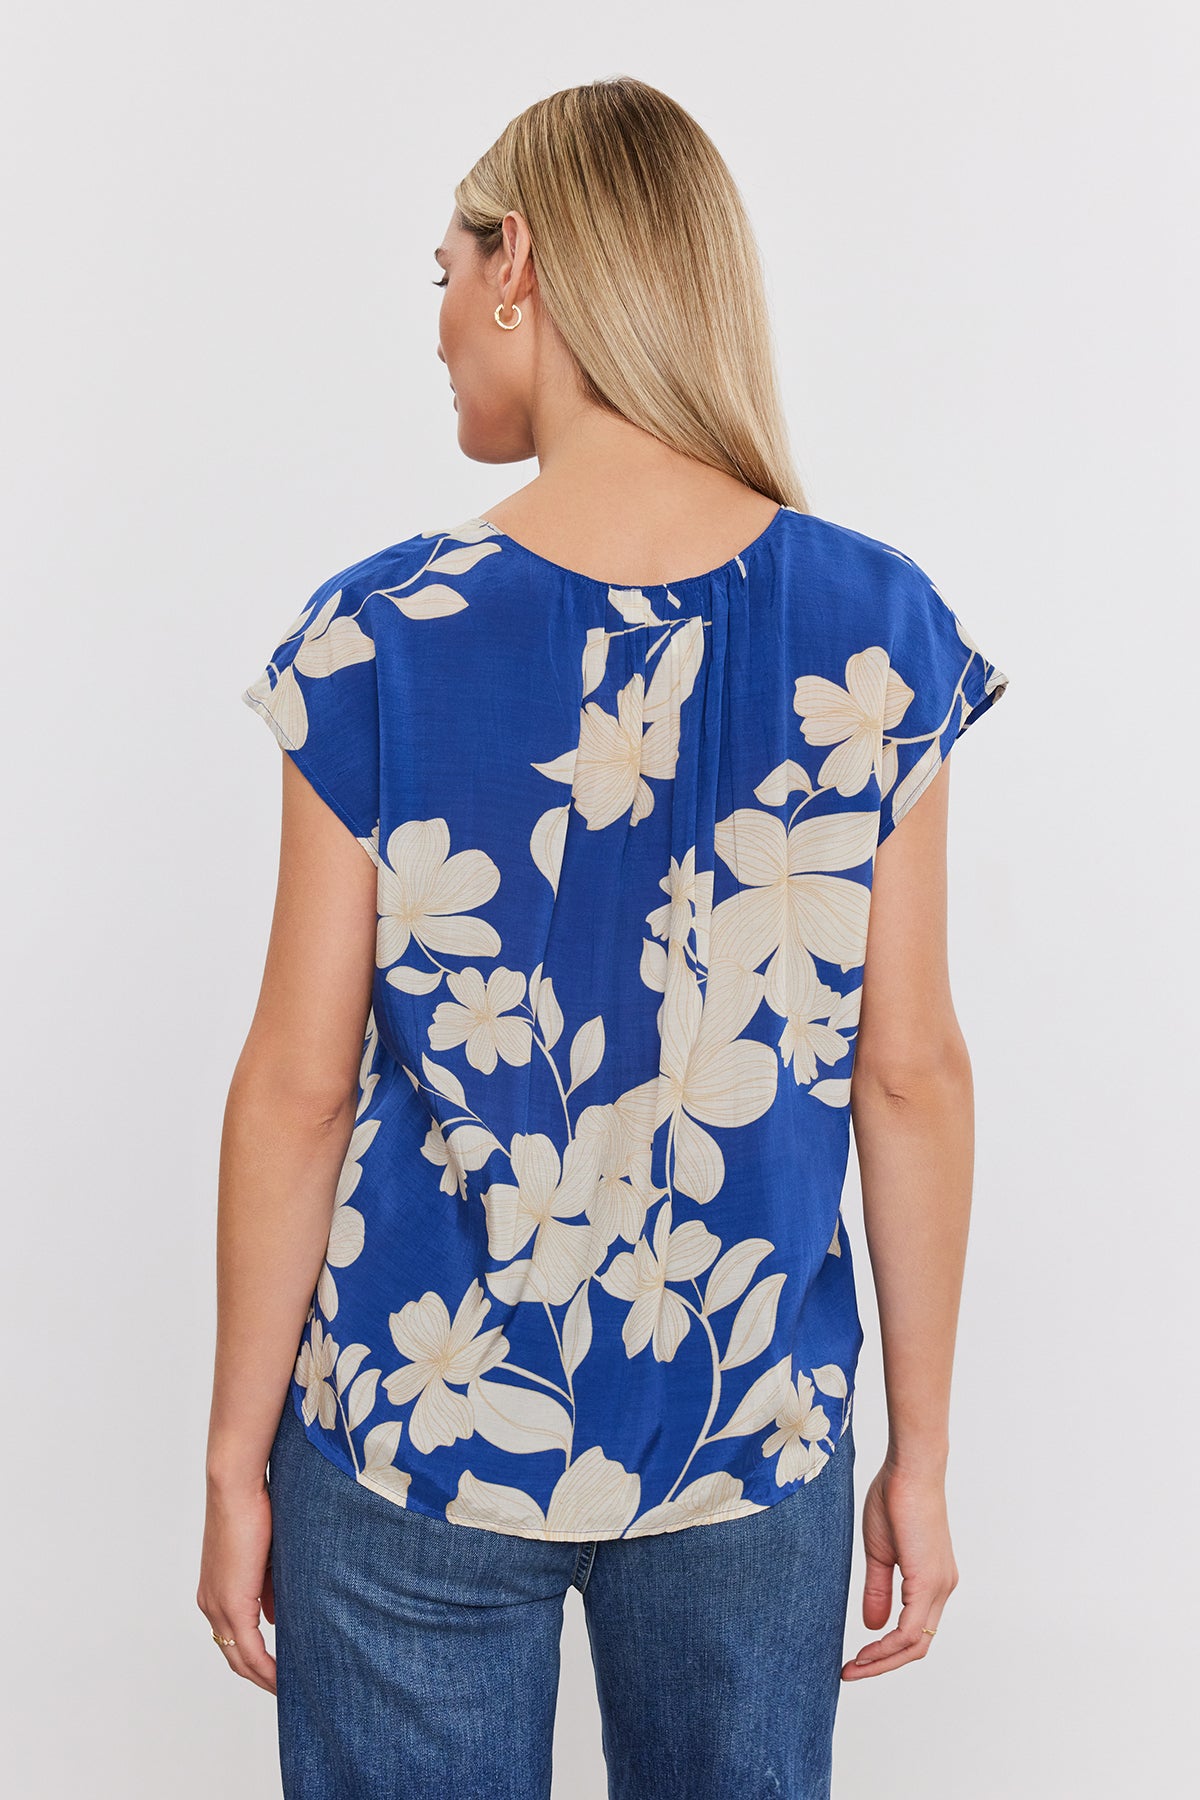 The woman is seen from the back, wearing a Velvet by Graham & Spencer SHAYLEN PRINTED SCOOP NECK top.-35655290454209